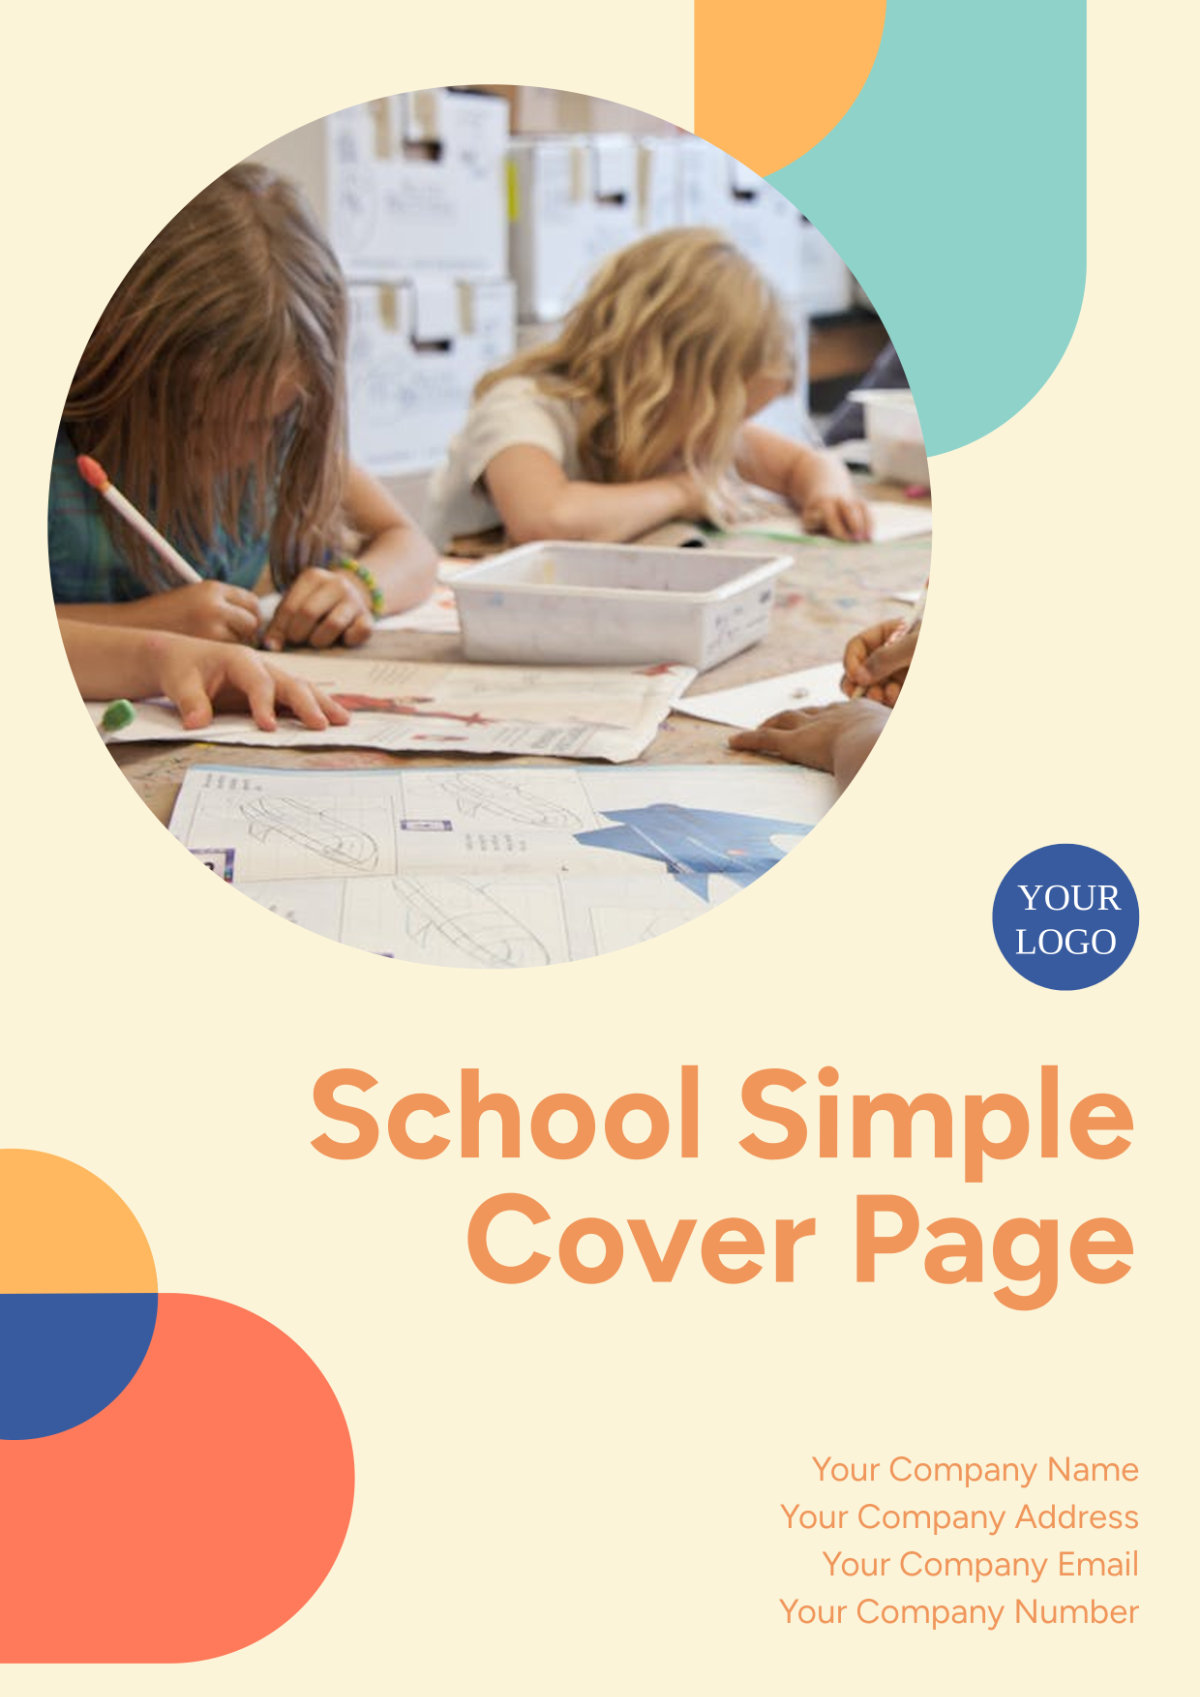 School Simple Cover Page